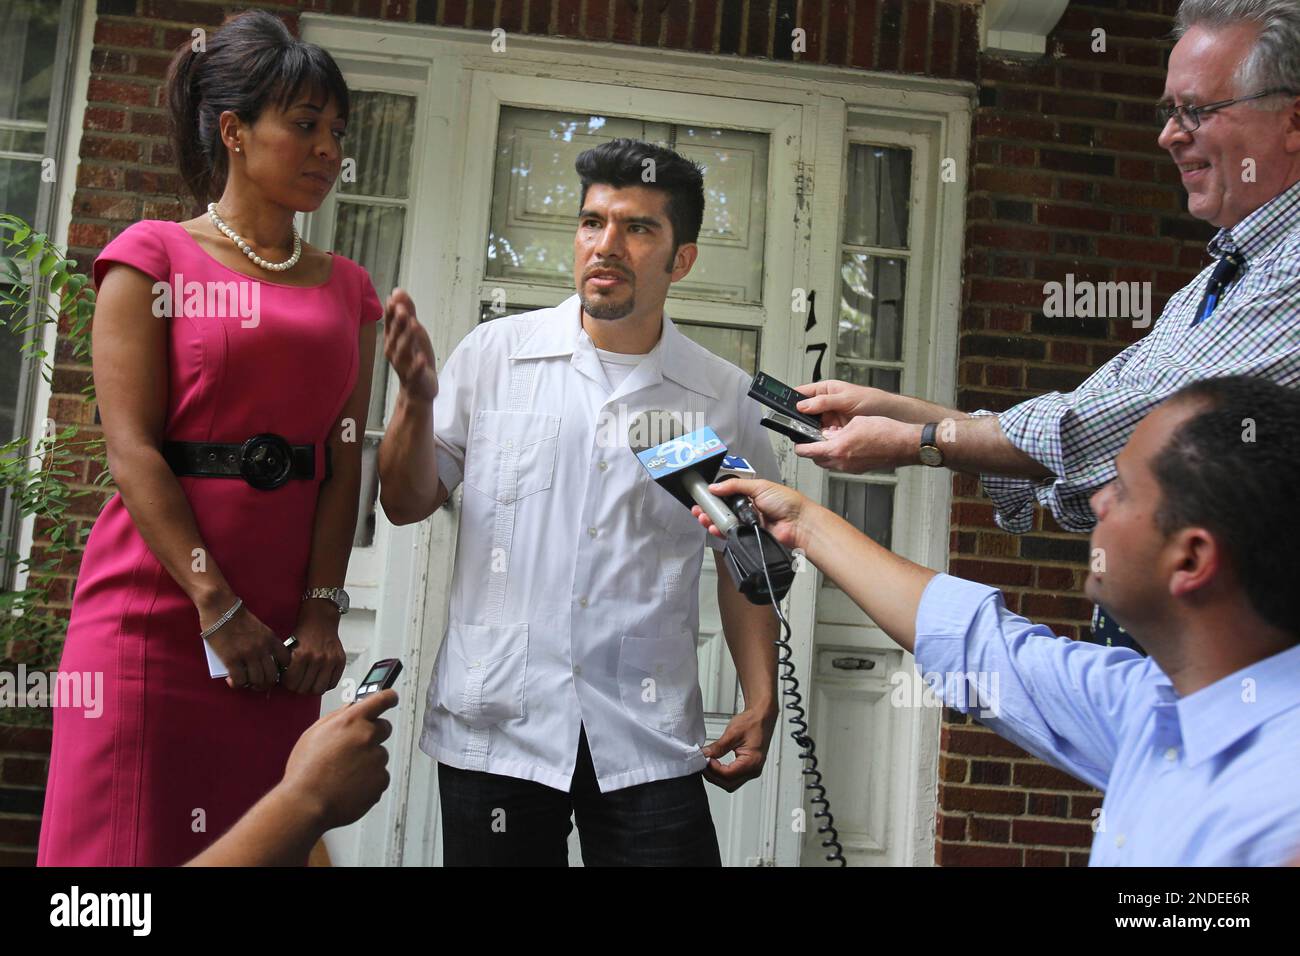 Waldo Mariscal, center, son of accused spy Vicky Pelaez, speaks to the media with his attorney Genesis Peduto, left, on the front porch of his family home in Yonkers, N.Y., Friday, July 9, 2010. (AP Photo/Seth Wenig) Stock Photo